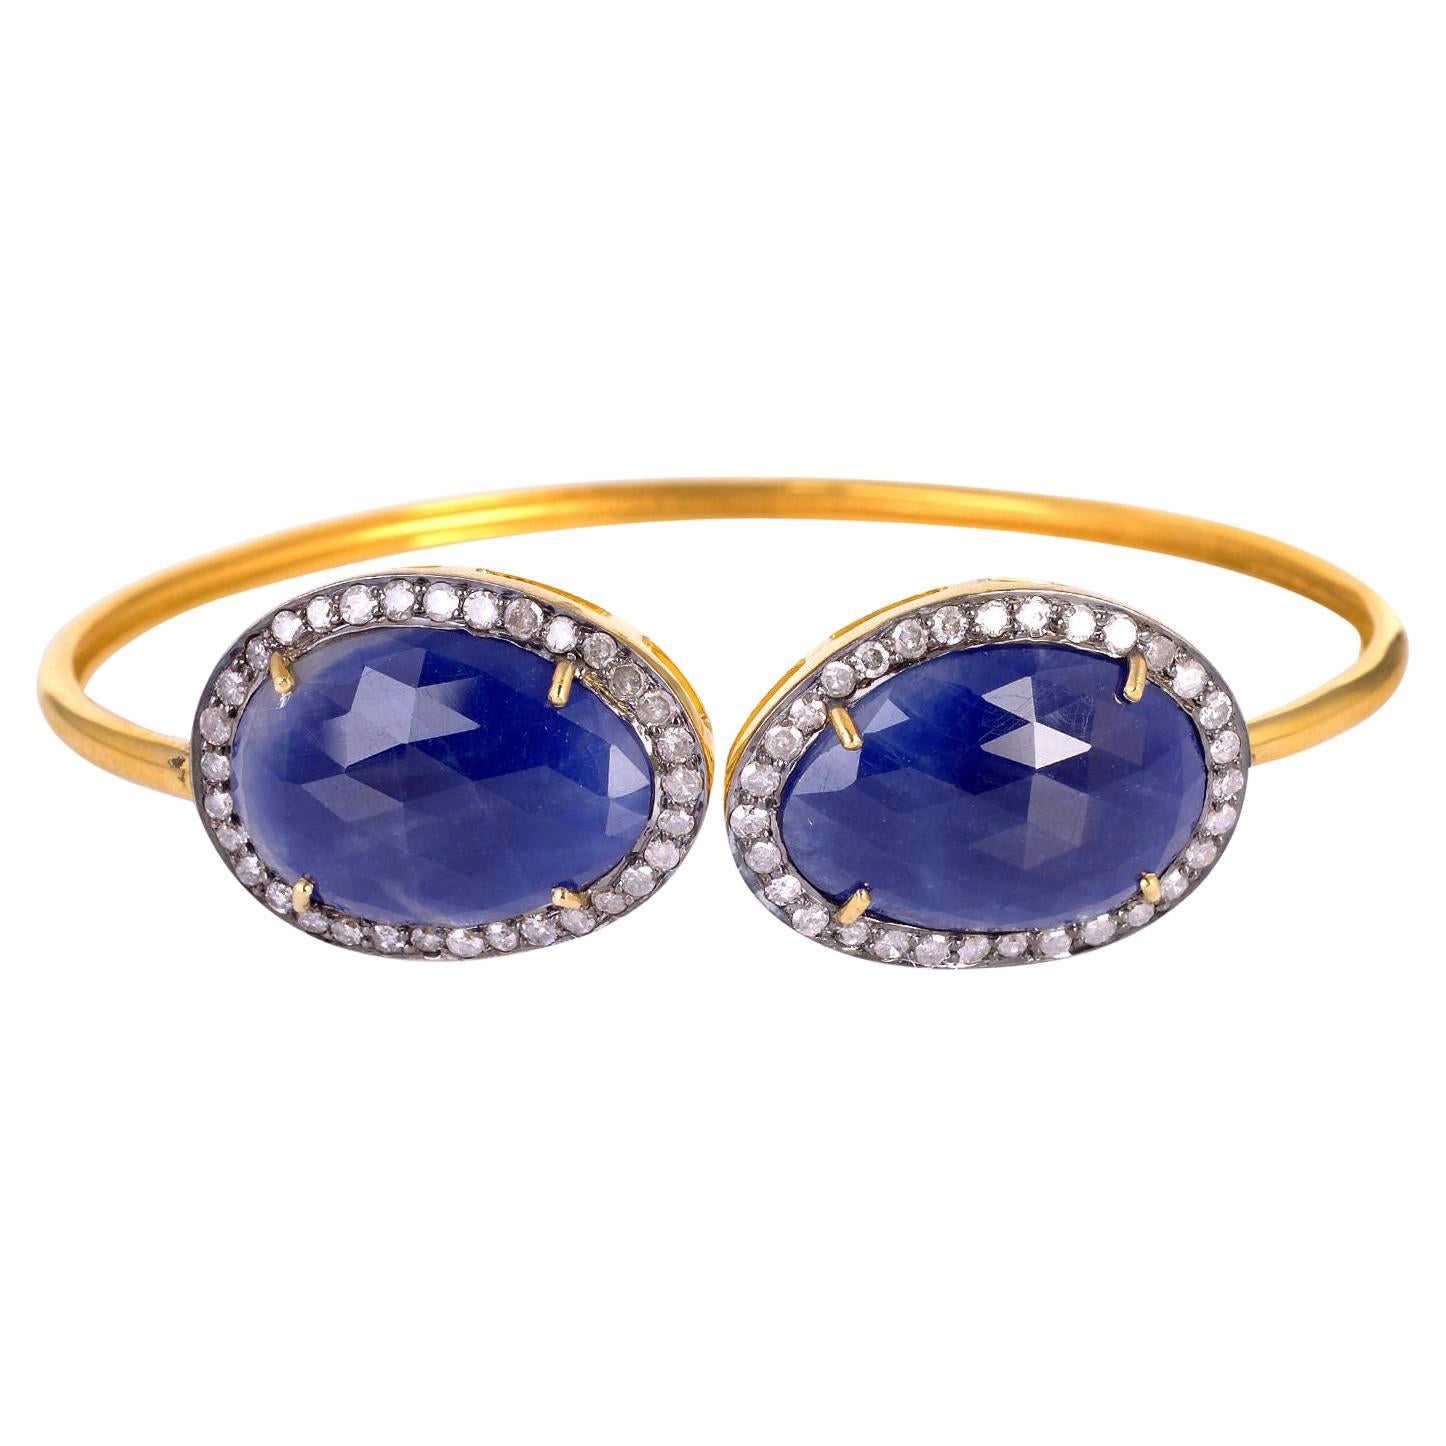 Designer Cuff Bracelet with Blue Sapphire Stones Surrounded by Pave Diamonds For Sale